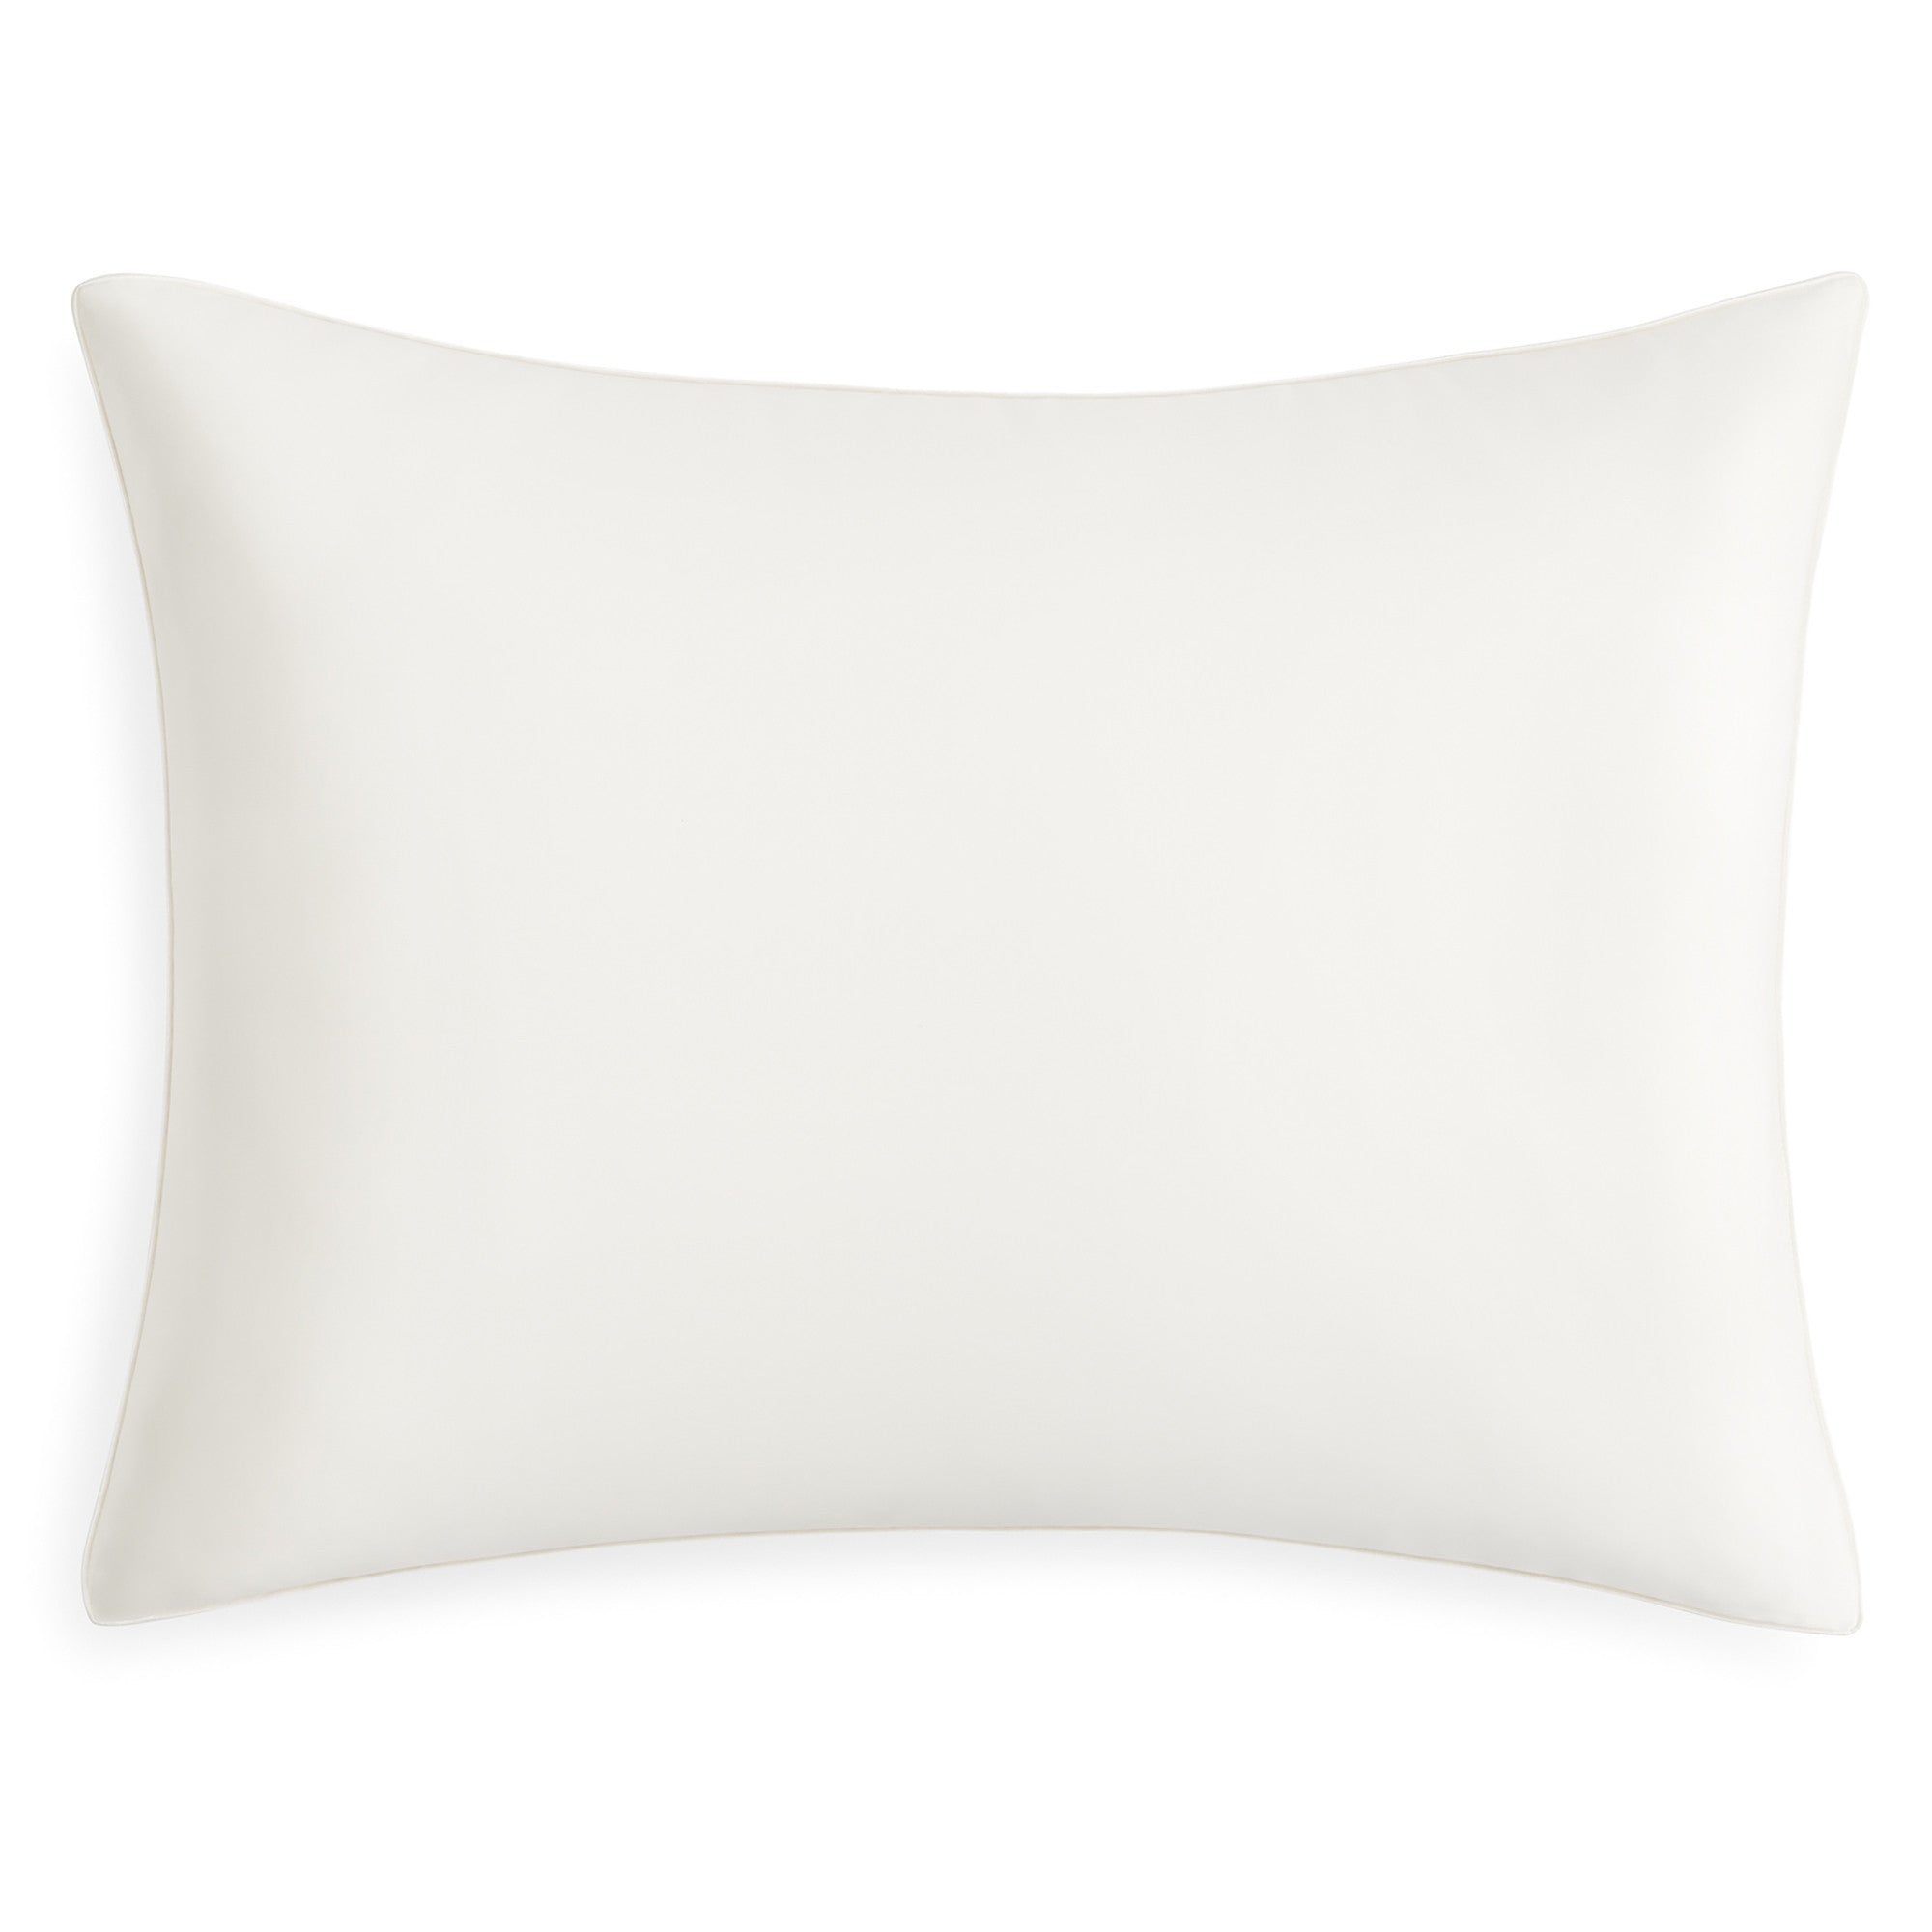 Charmeuse silk pillowcase with classic pipping by perle silk